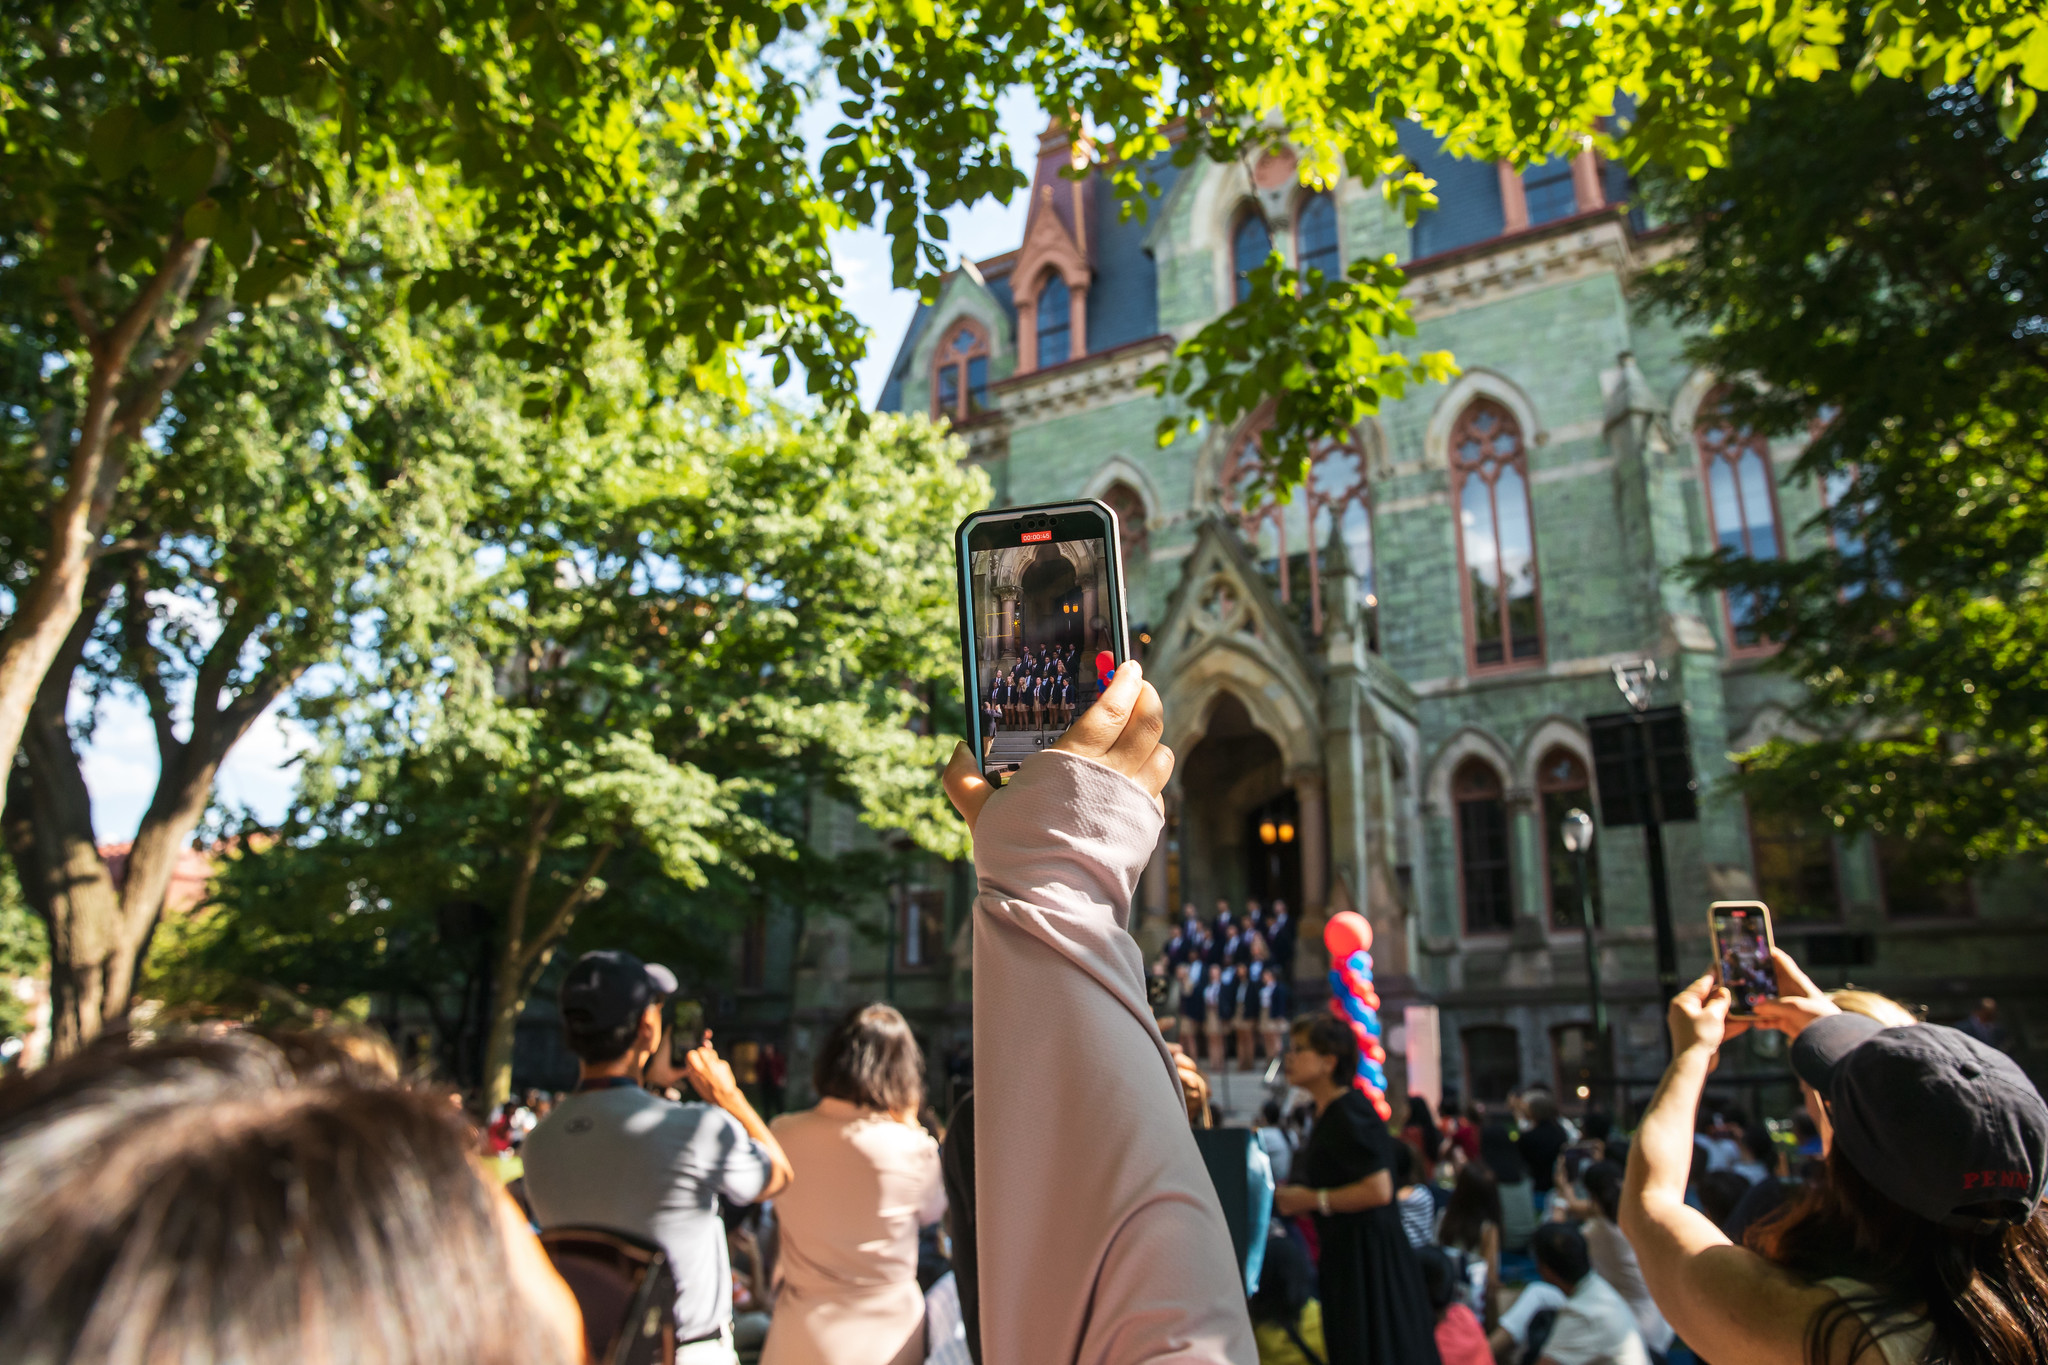 A crowd of people in front of College Hall, one holds up a smartphone to photograph a singing group on the steps.